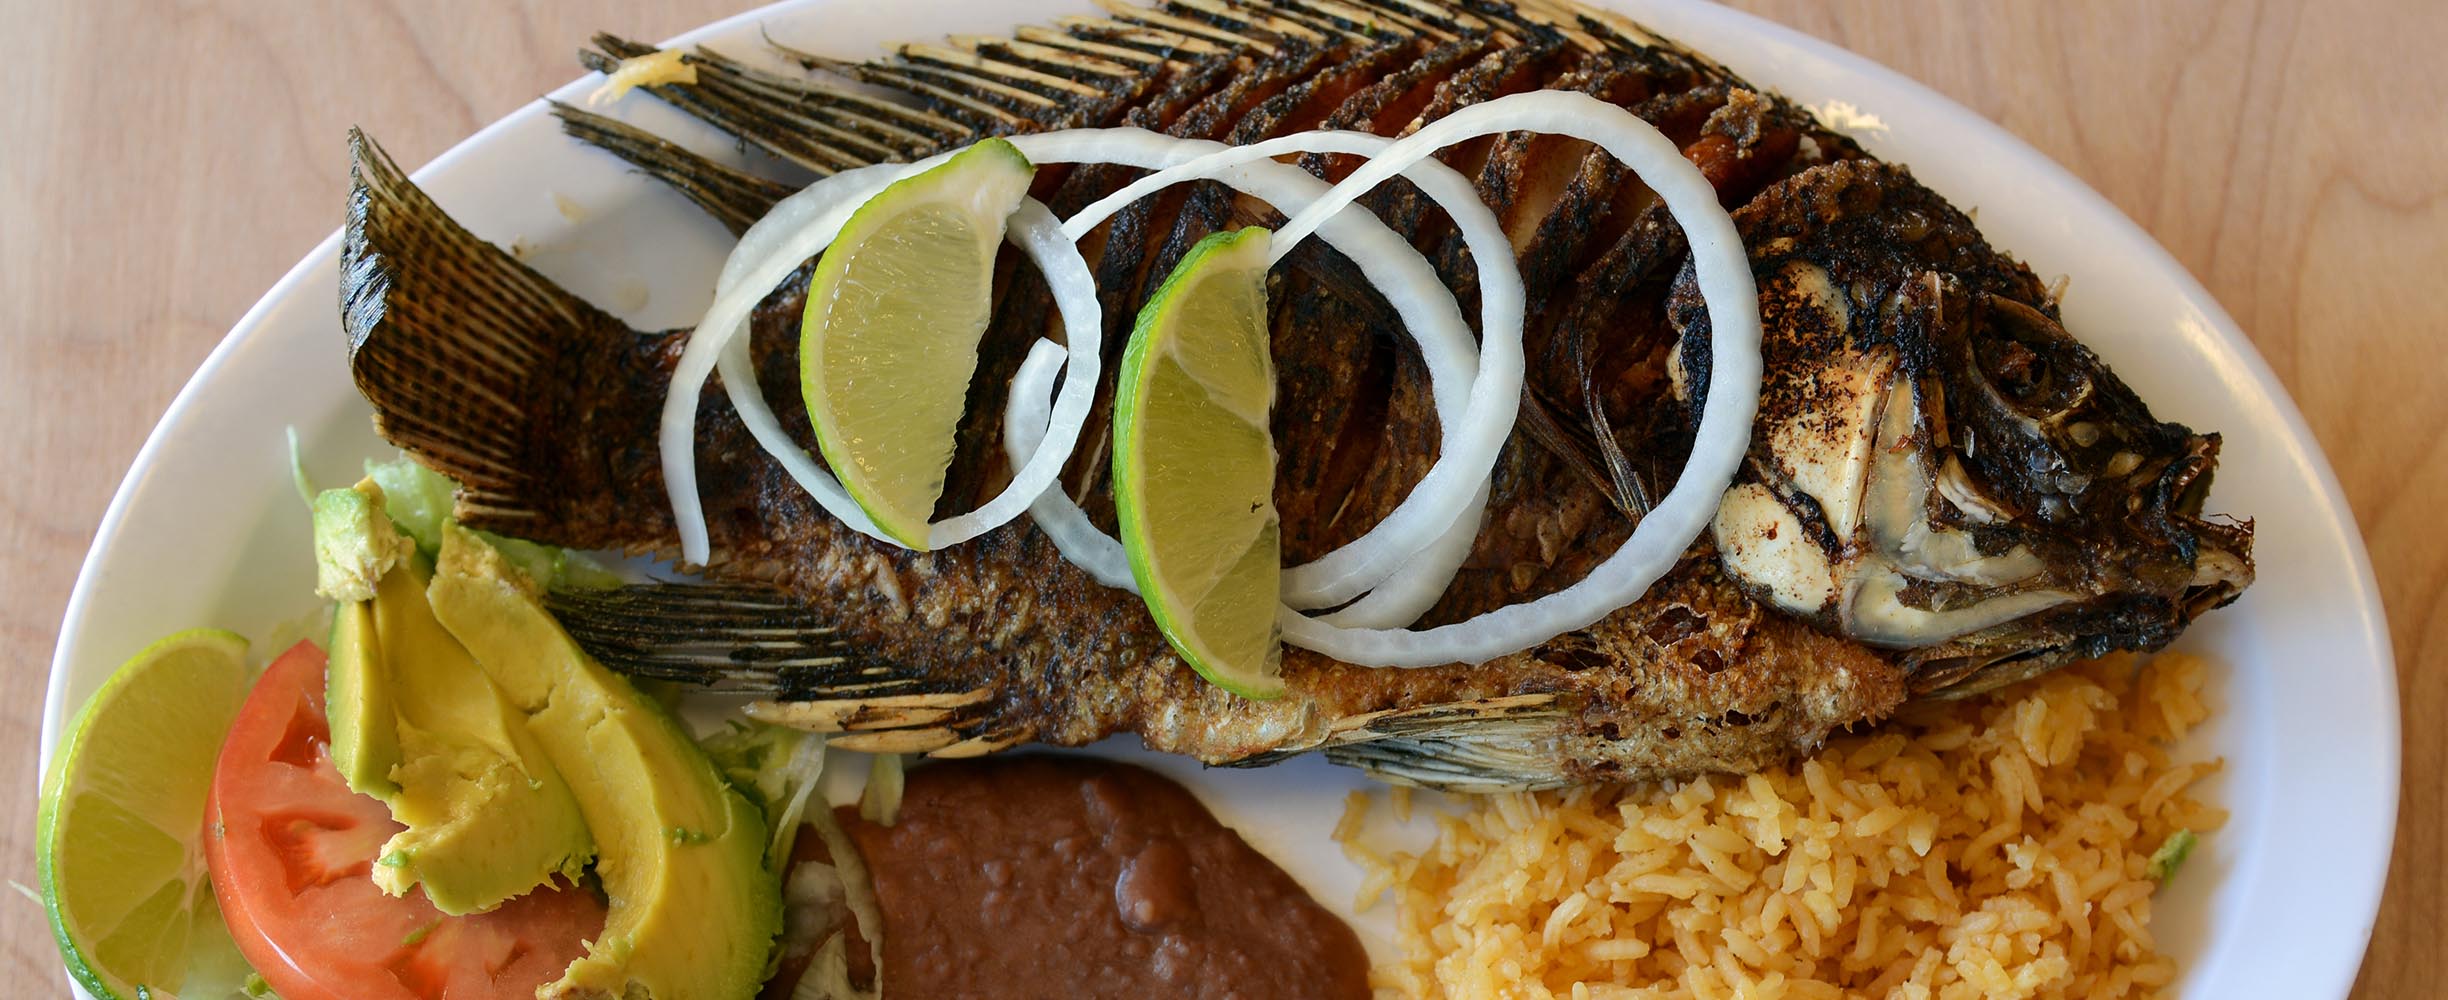 Whole Fried Fishprepared by Central American cooks